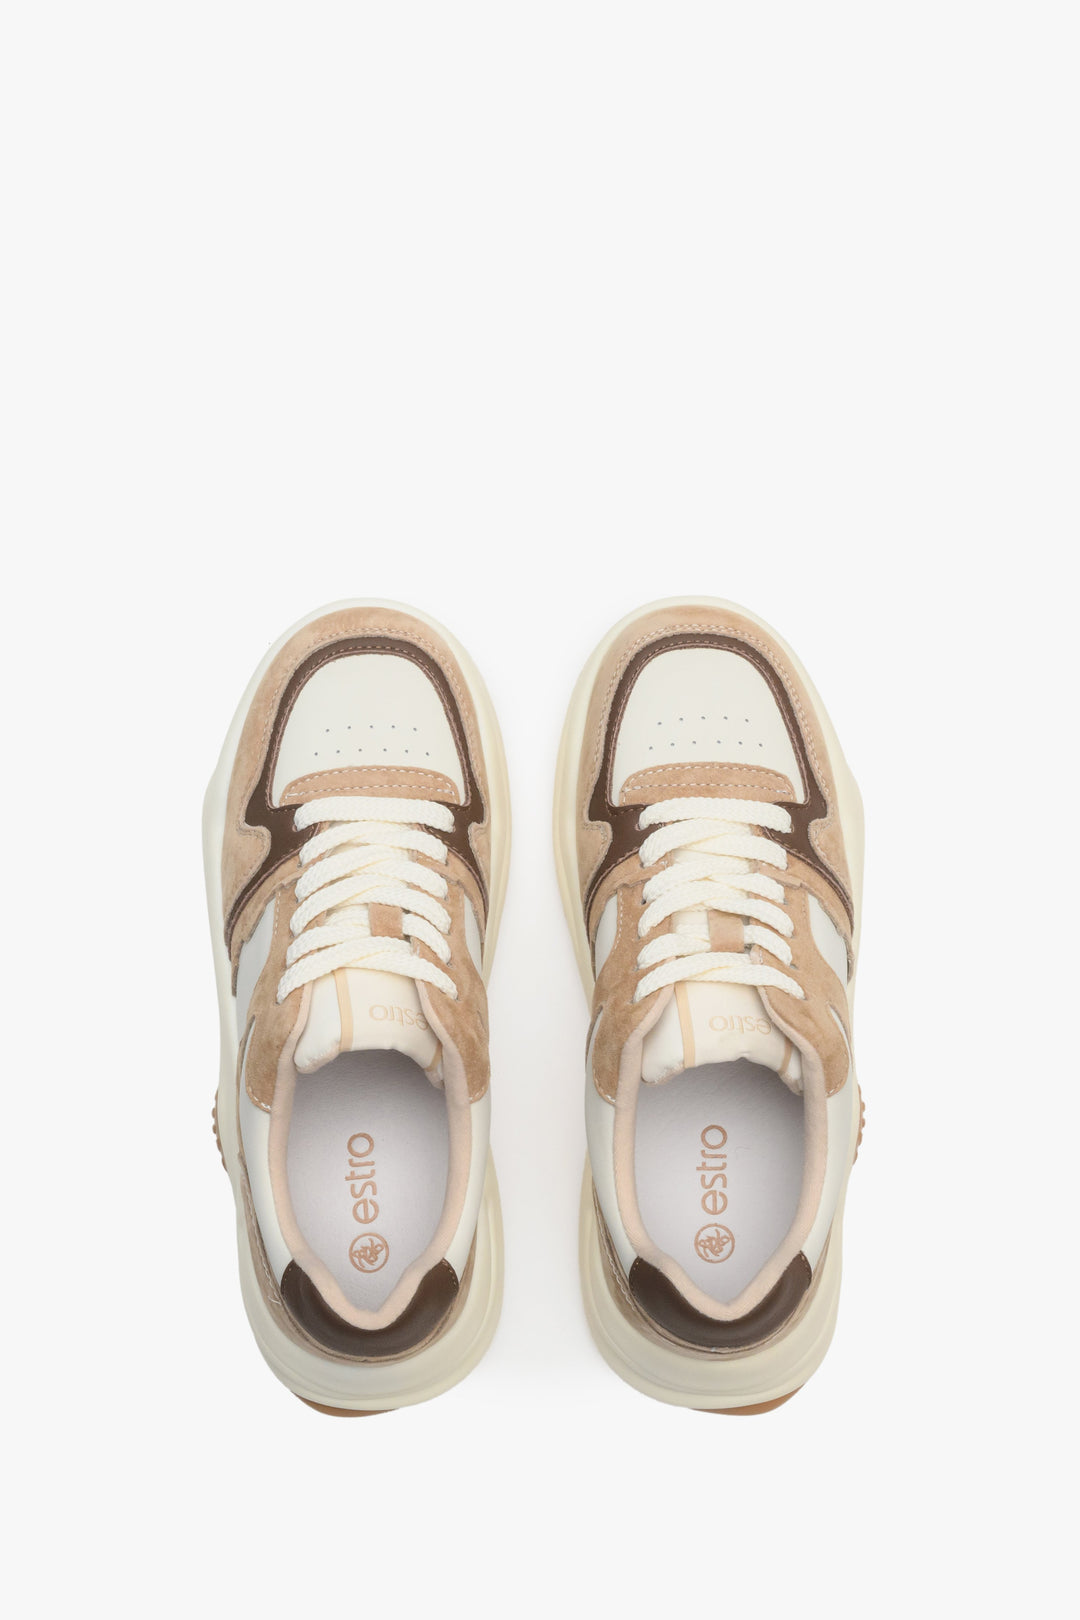 Women's beige and white casual sneakers - presentation of the footwear from above.